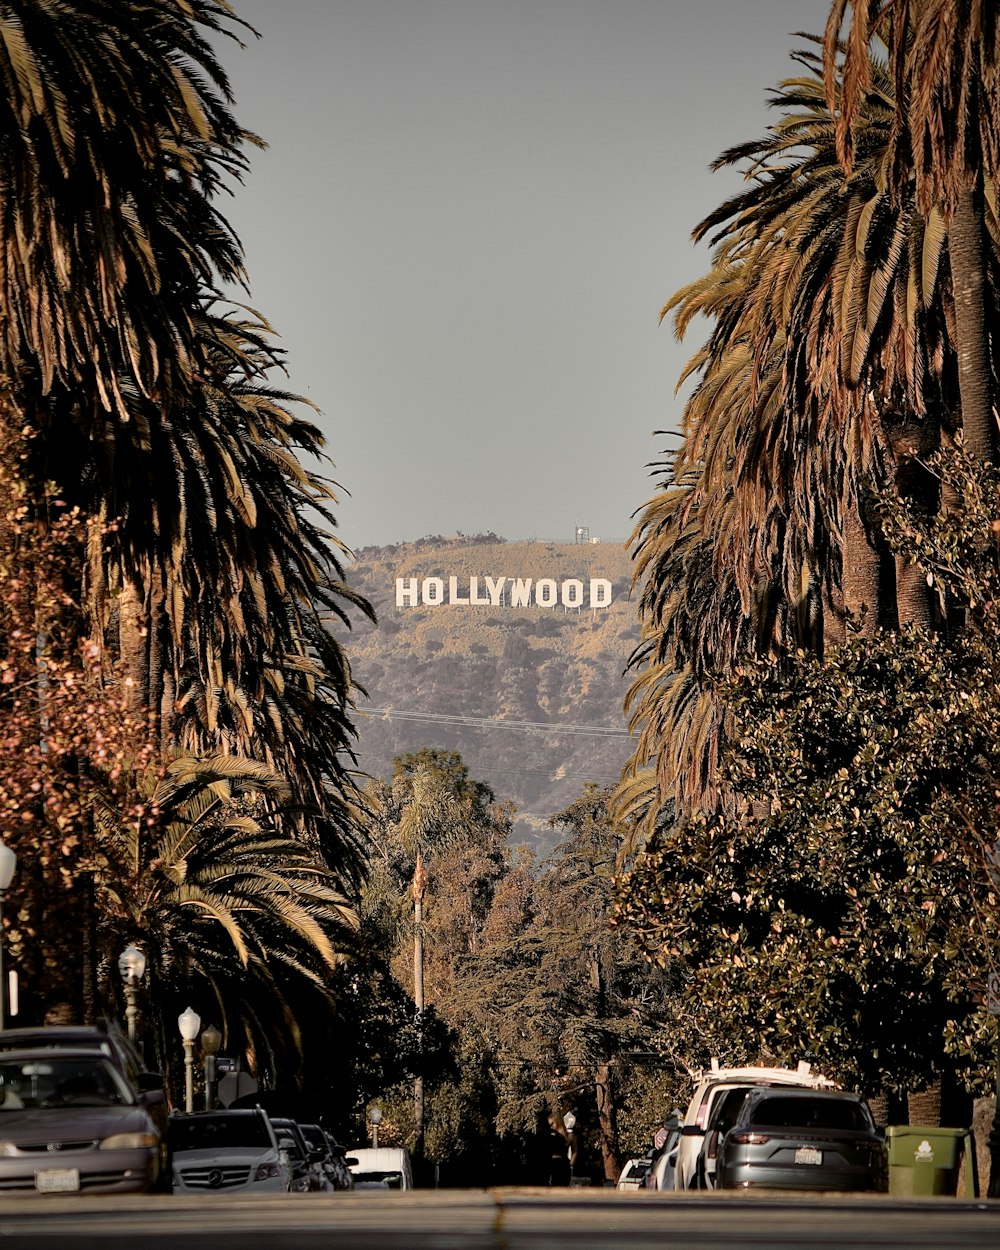 the hollywood sign is surrounded by palm trees